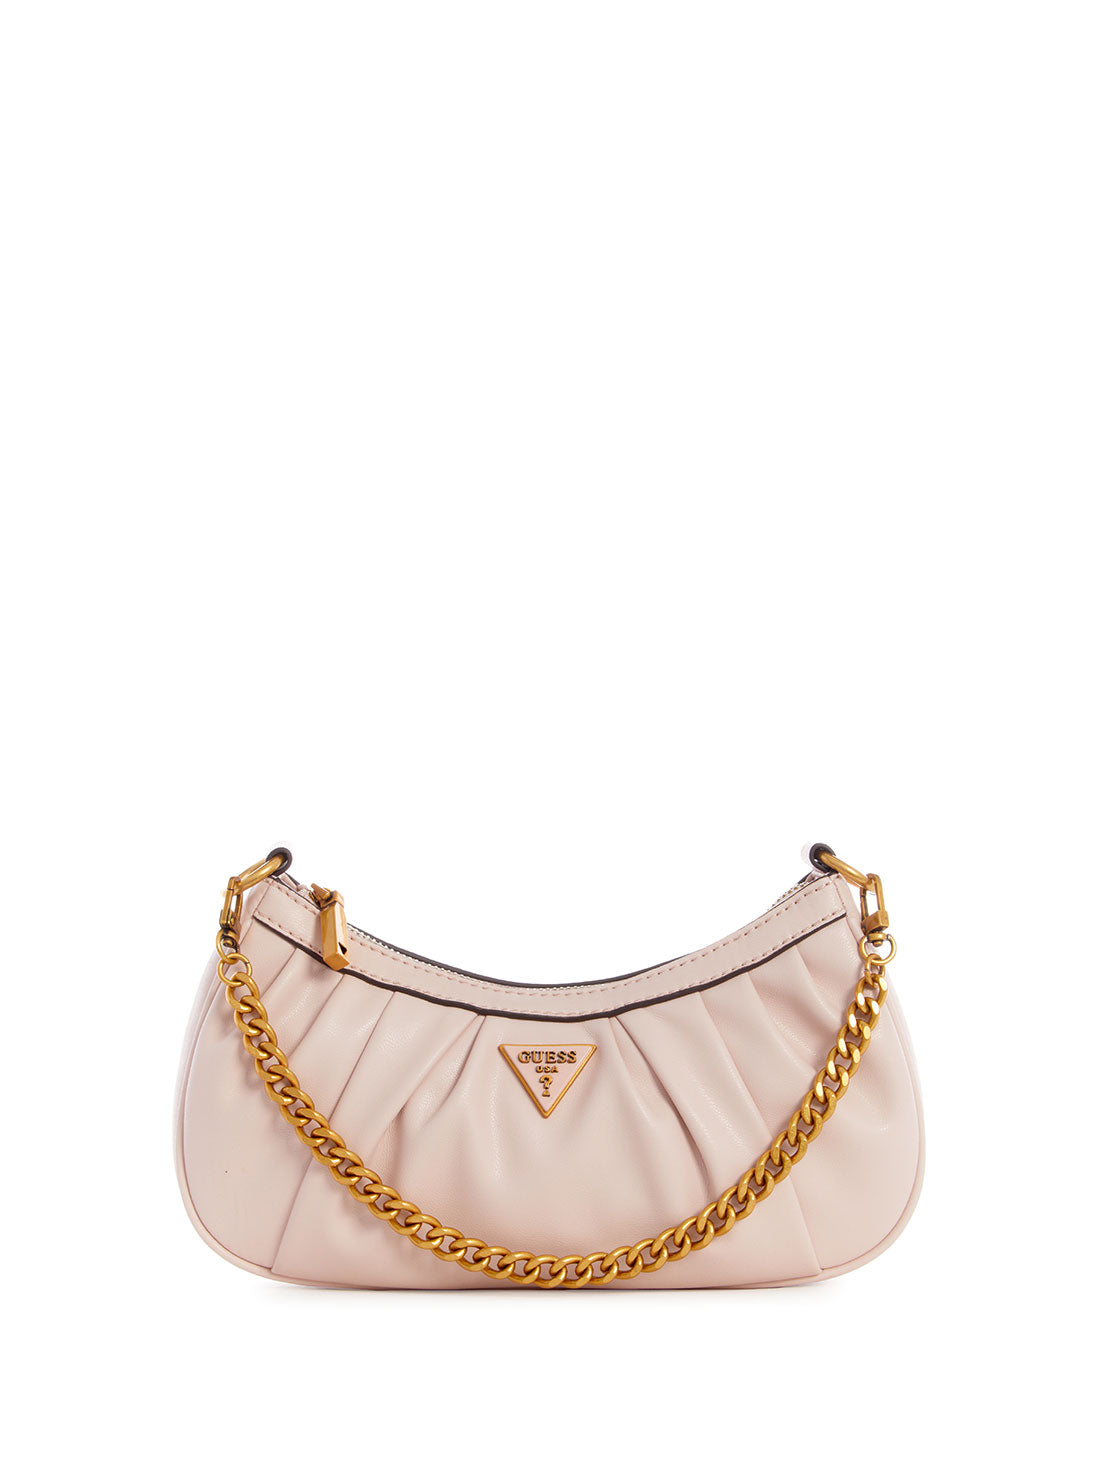 Shell Mariana Pouch Shoulder Bag - GUESS